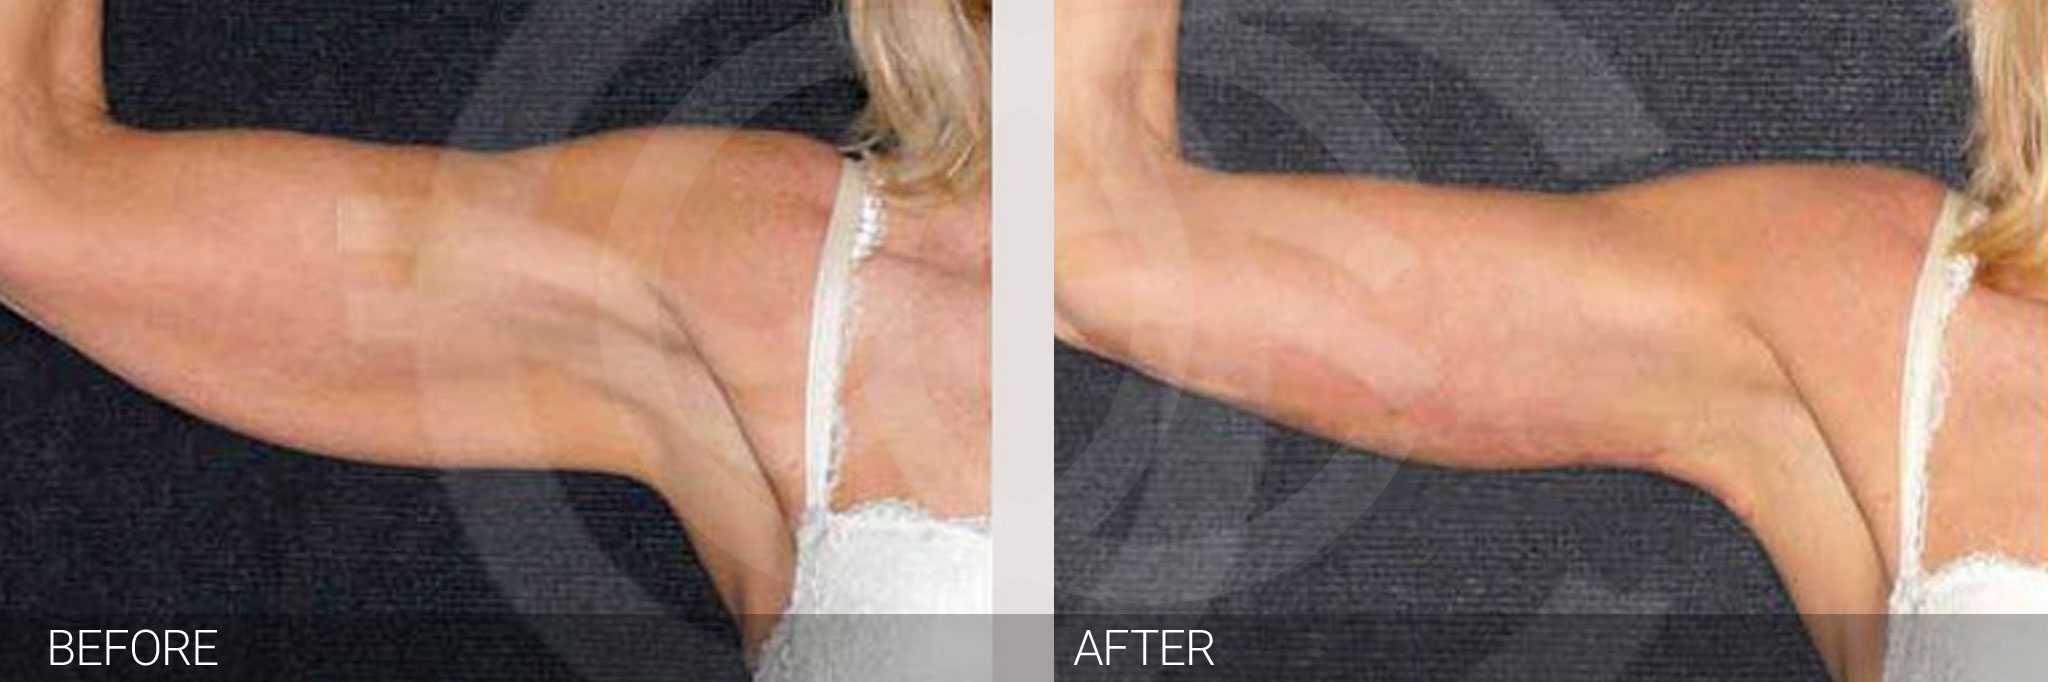 Arm Lift with Liposuction ante/post-op I